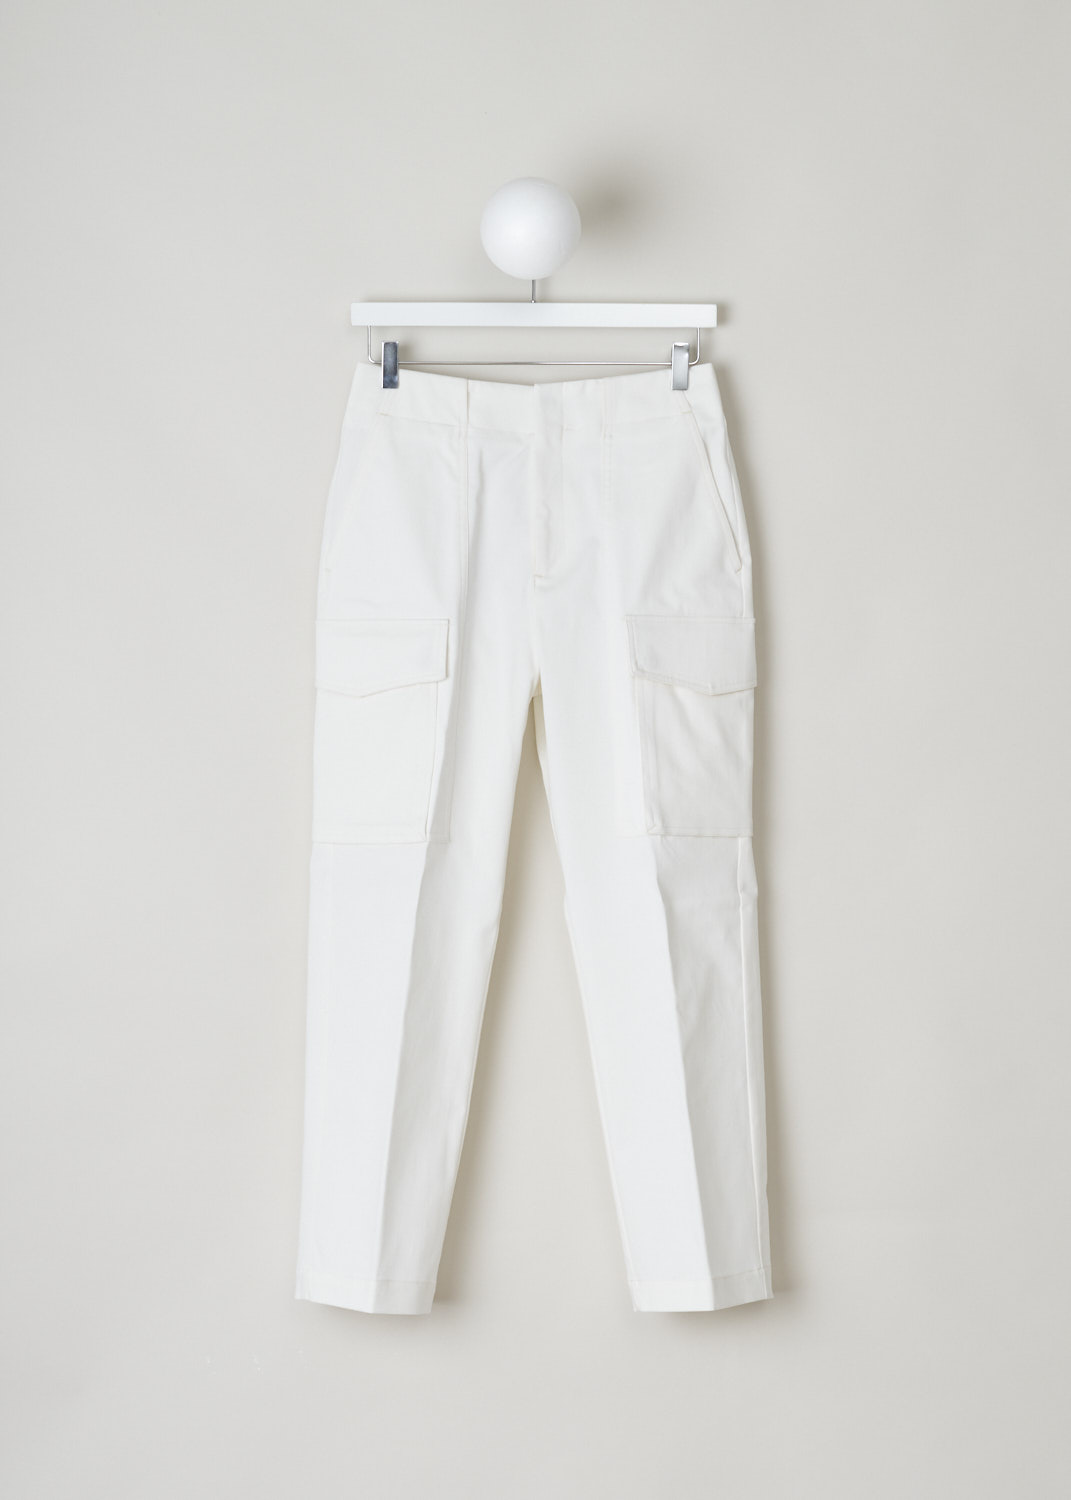 Closed, Wide fitted flat front chino, clea_C91597_30T_22_218, white, front, A white chino cut in the flat front model with a wide fit. Featuring forward slated pockets on the front and welted pockets on the back. Further decorating the front is a functional cargo pocket.